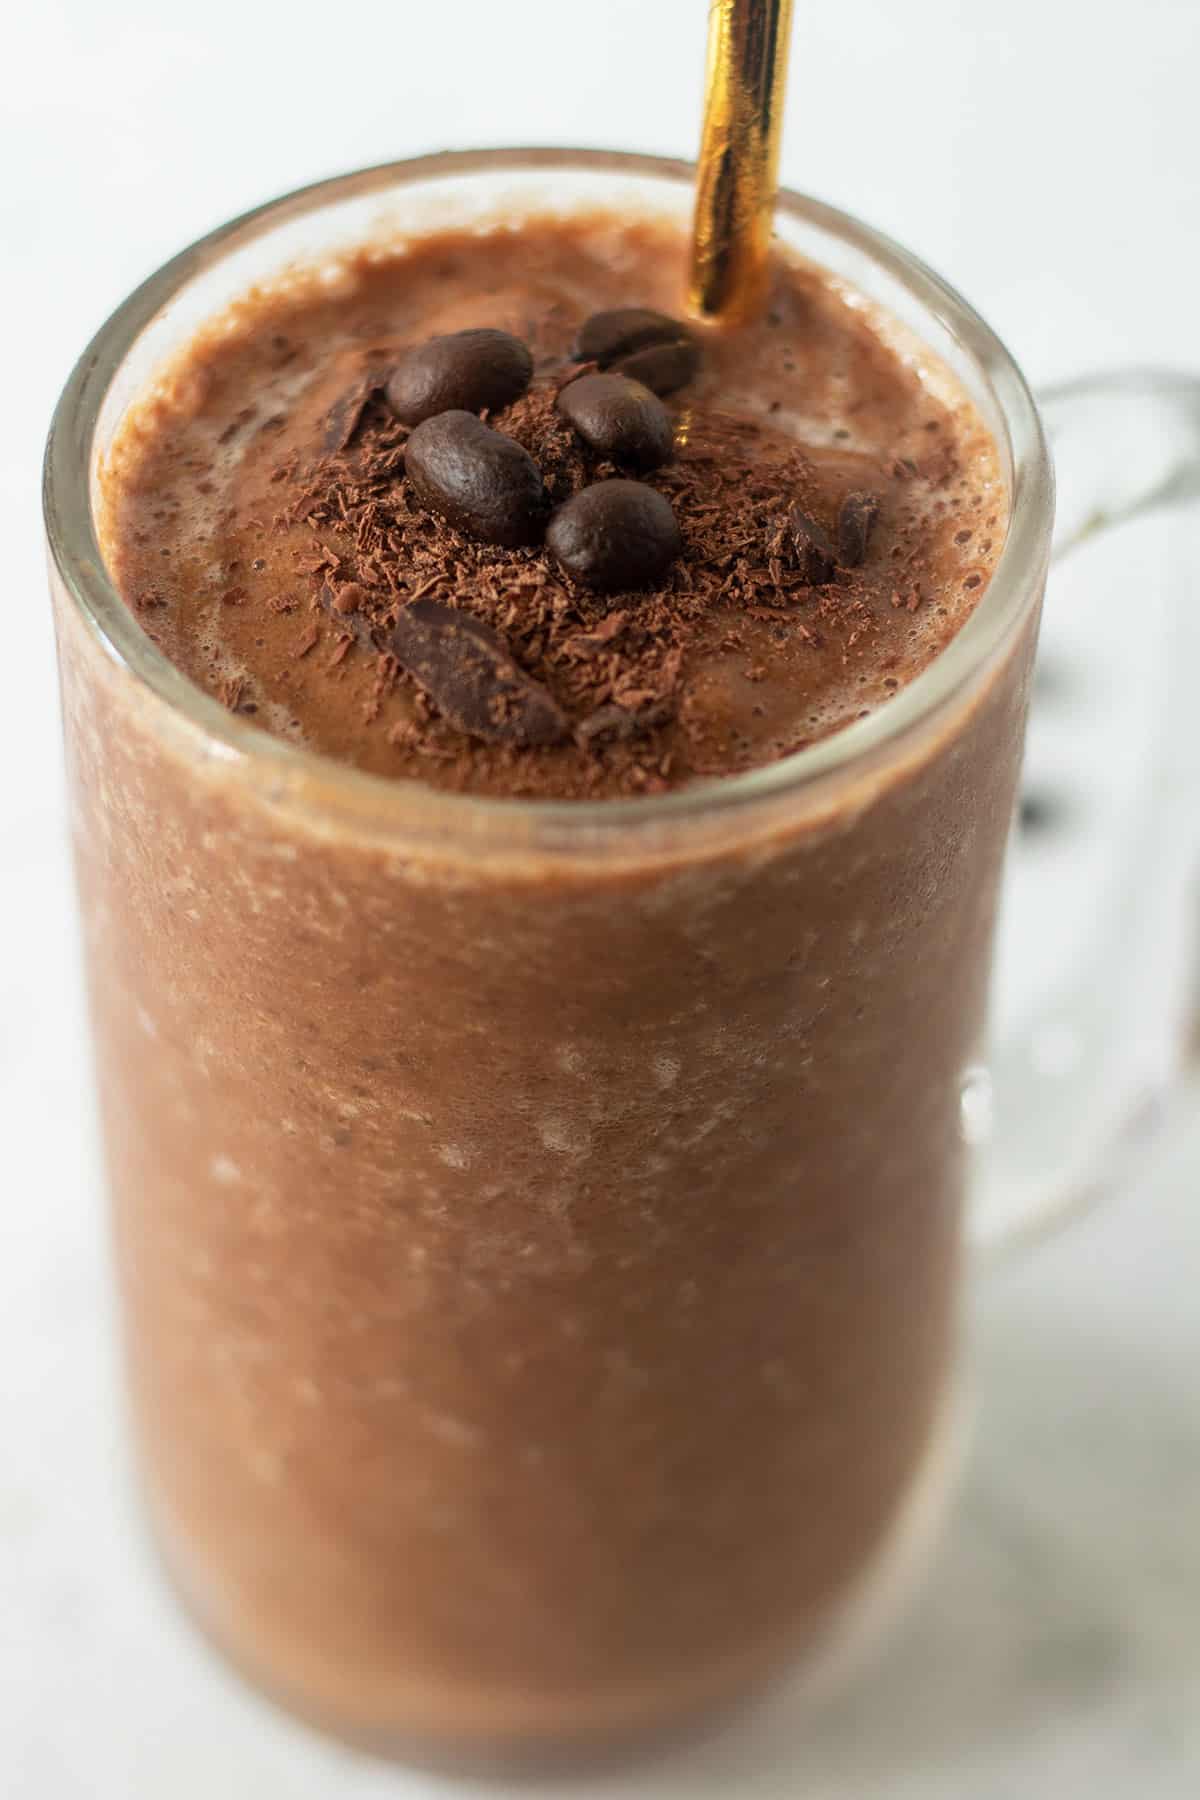 mocha coffee smoothie recipe in a clear glass garnished with shaved chocolate, fresh coffee beans and a gold straw for serving.